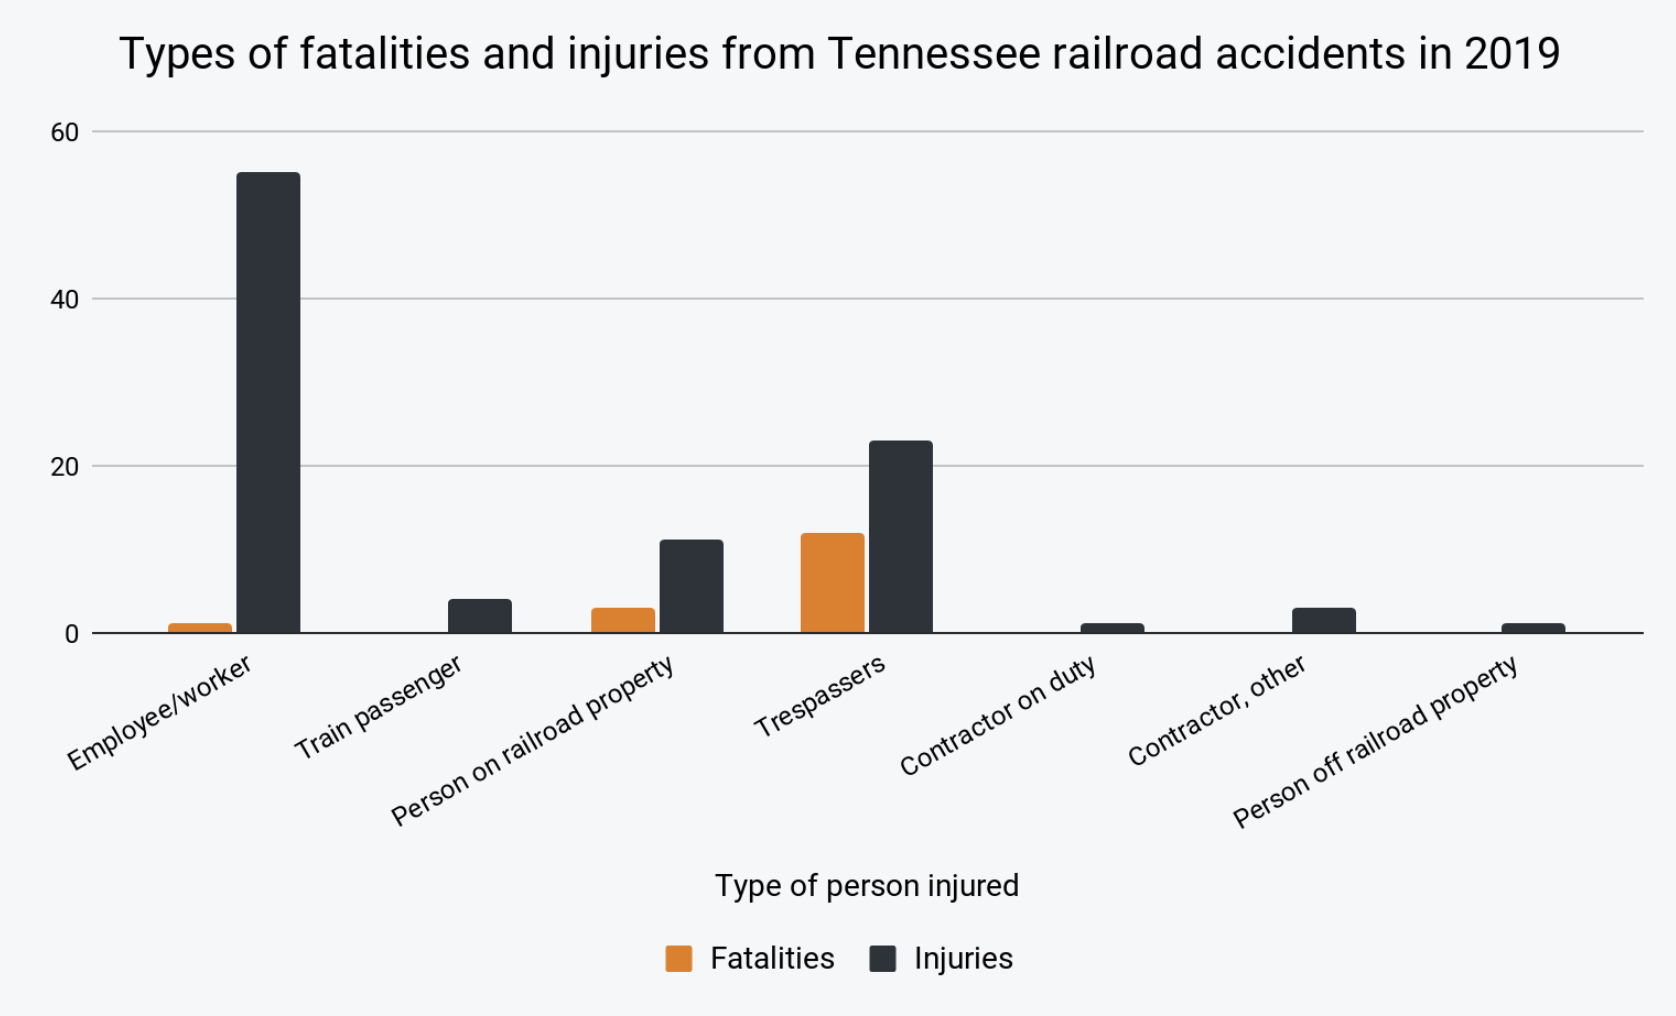 Train accident injuries and fatalities